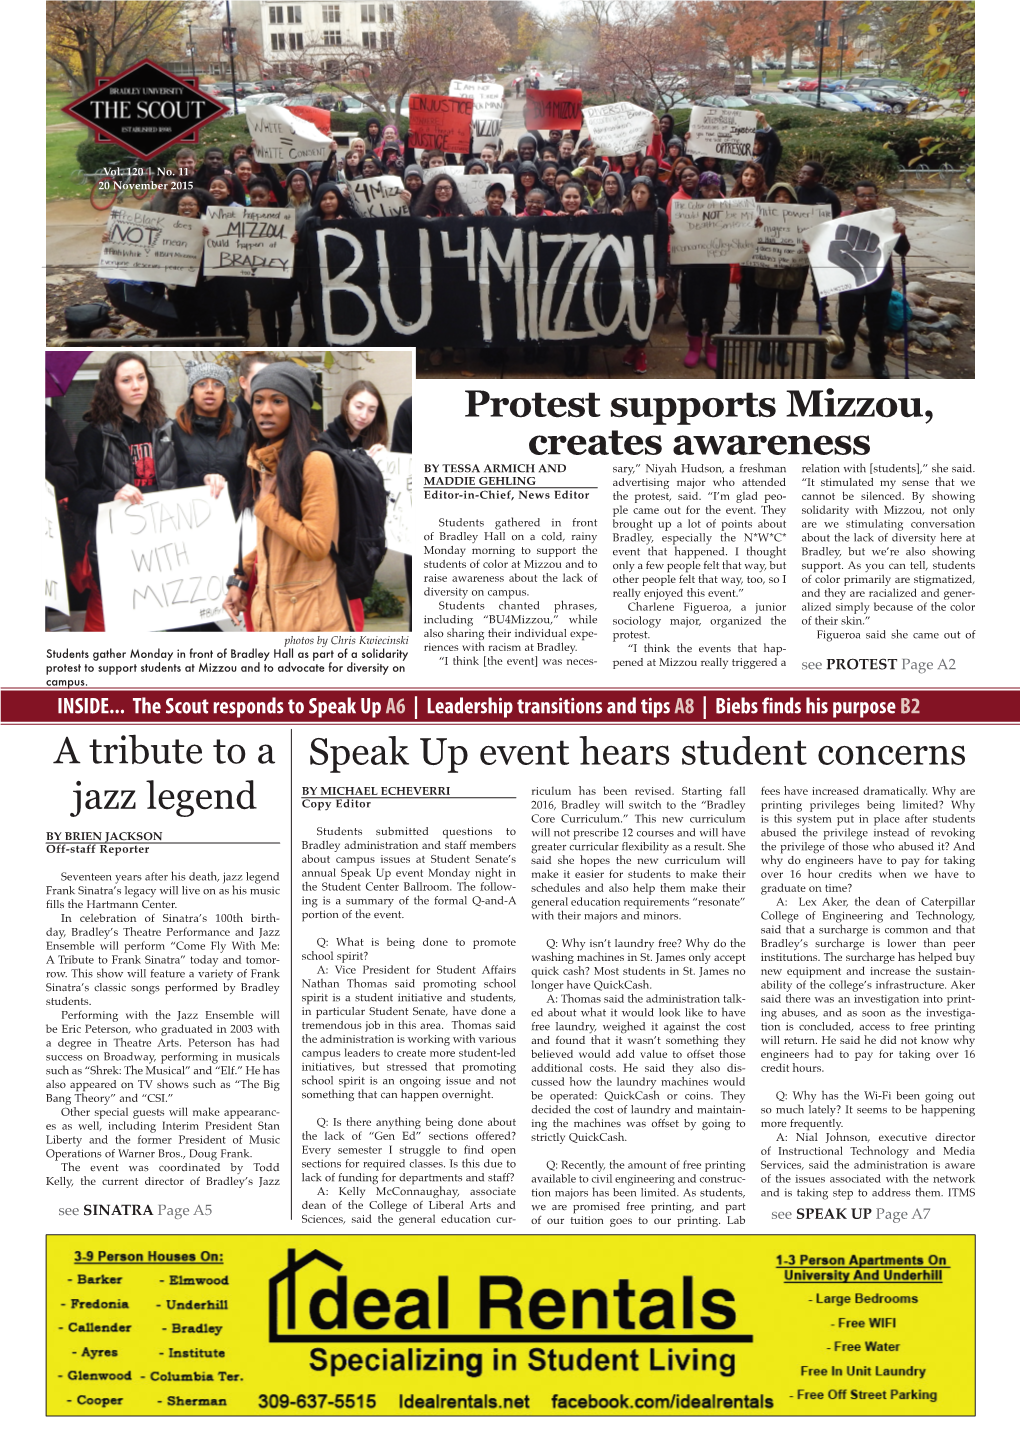 Protest Supports Mizzou, Creates Awareness a Tribute to a Jazz Legend Speak up Event Hears Student Concerns